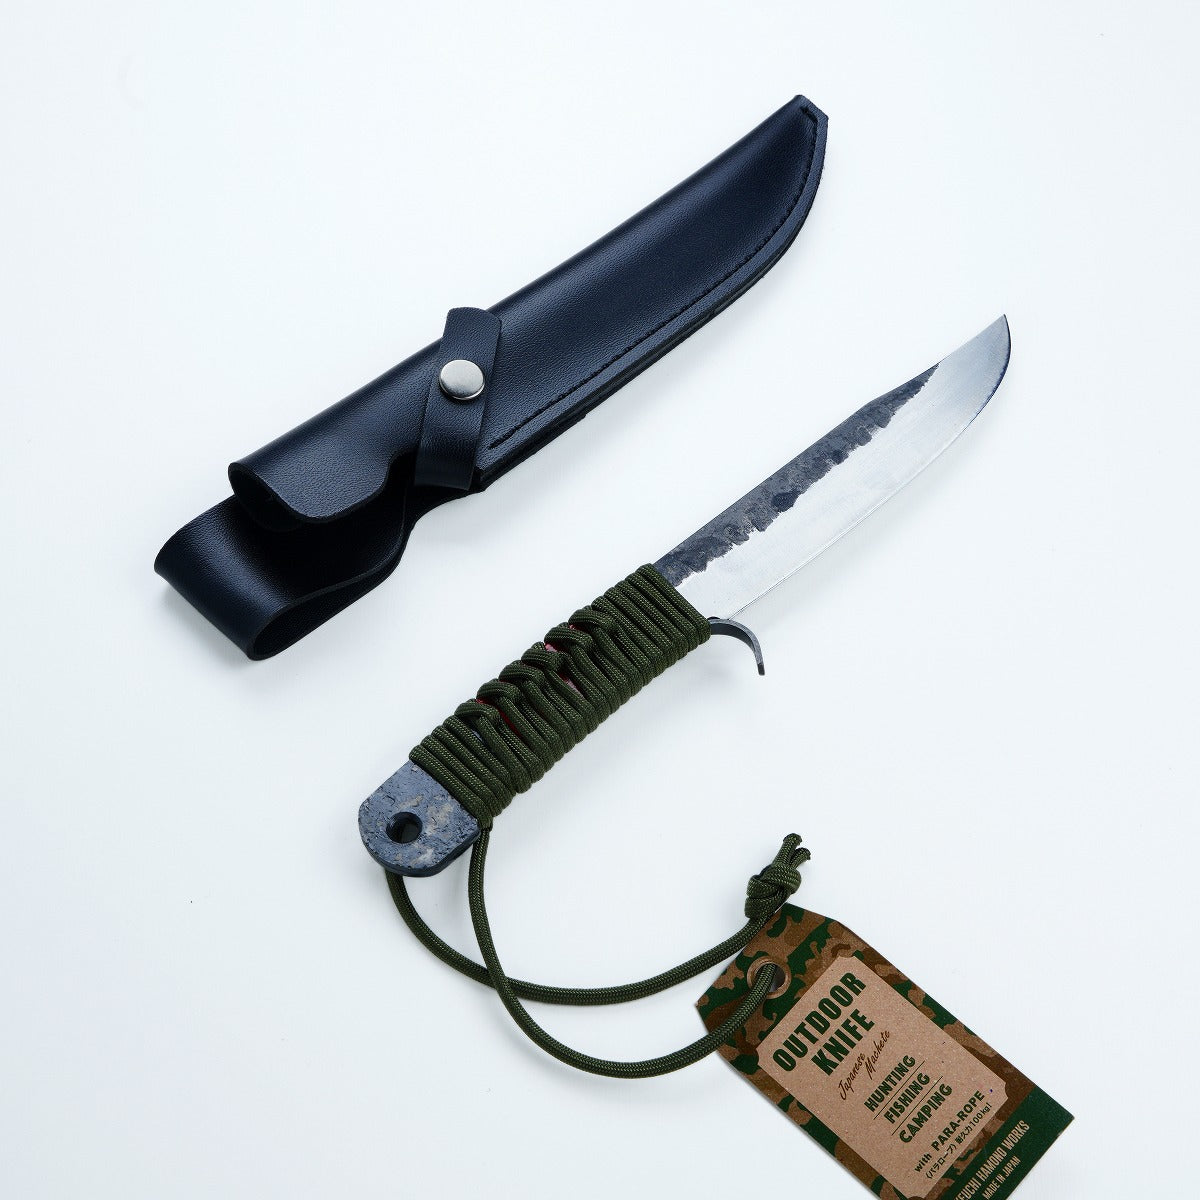 HONMAMON Japanese Outdoor Knife 150mm(abt 5.9") Blade Edge :" Aogami Steel" with Synthetic Leather Case